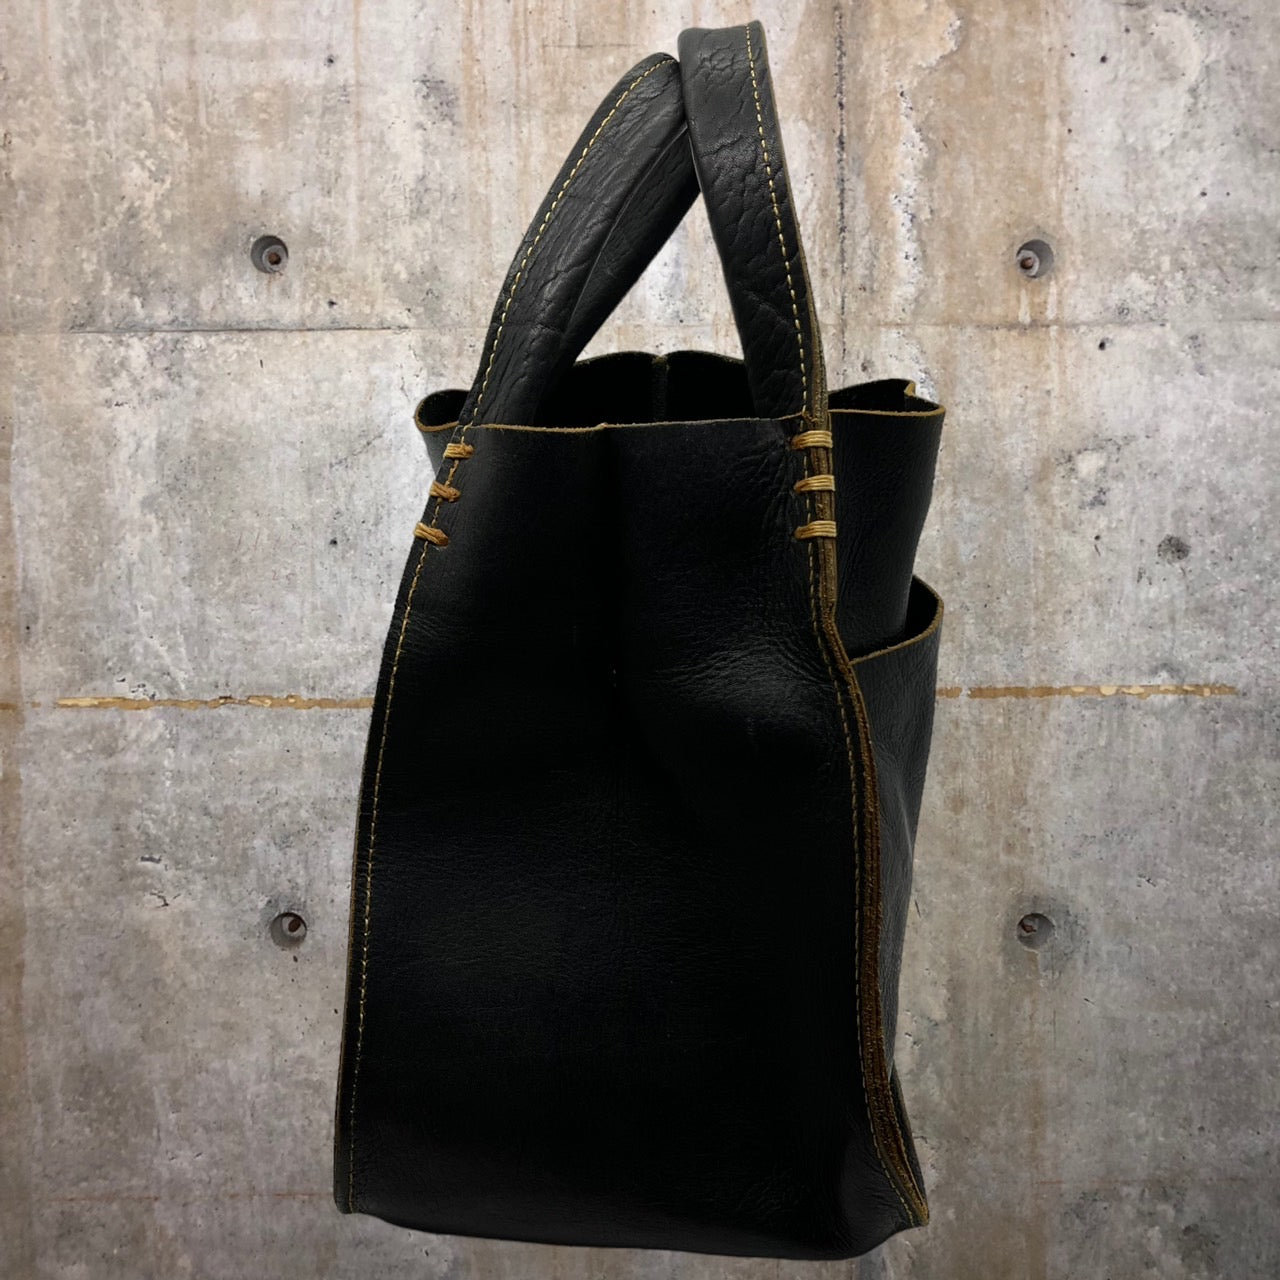 i.s. ISSEY MIYAKE(アイエス イッセイミヤケ) 80's leather triangle  tote bag/レザートートバッグ IS33-AG005 ブラック 厚手　IS 80s